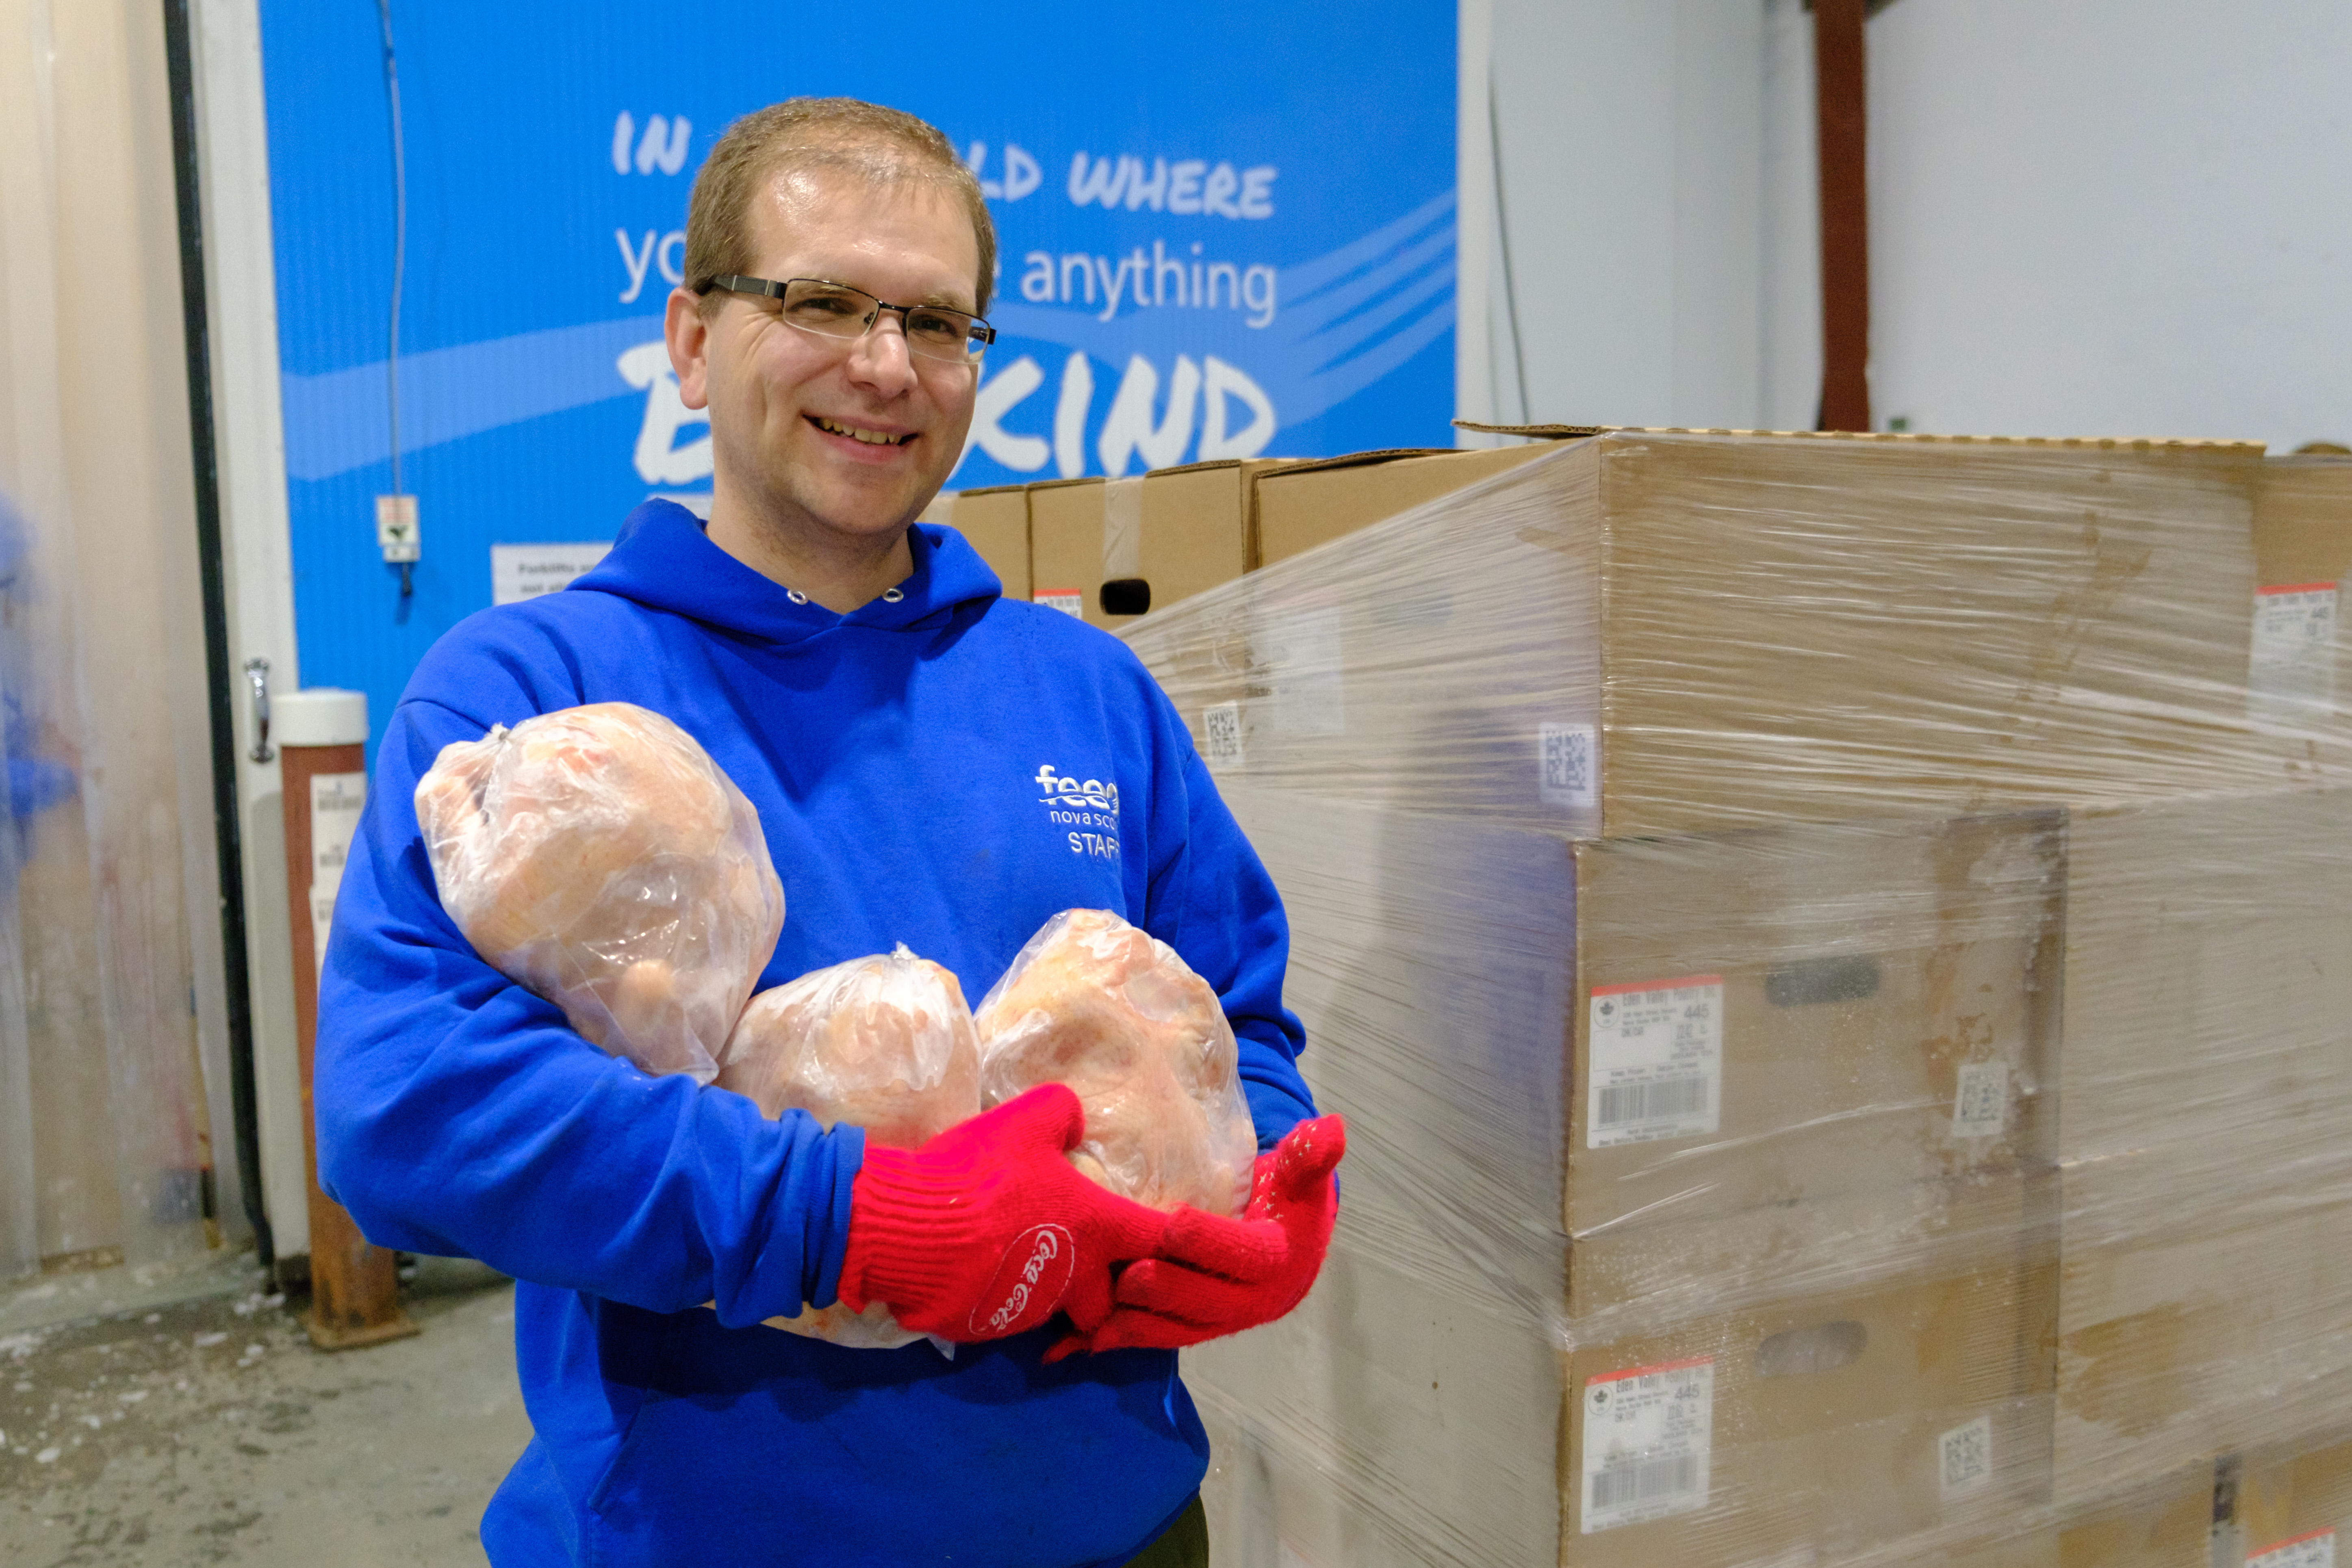 Feed Nova Scotia staff member holding frozen chickens that have been donated